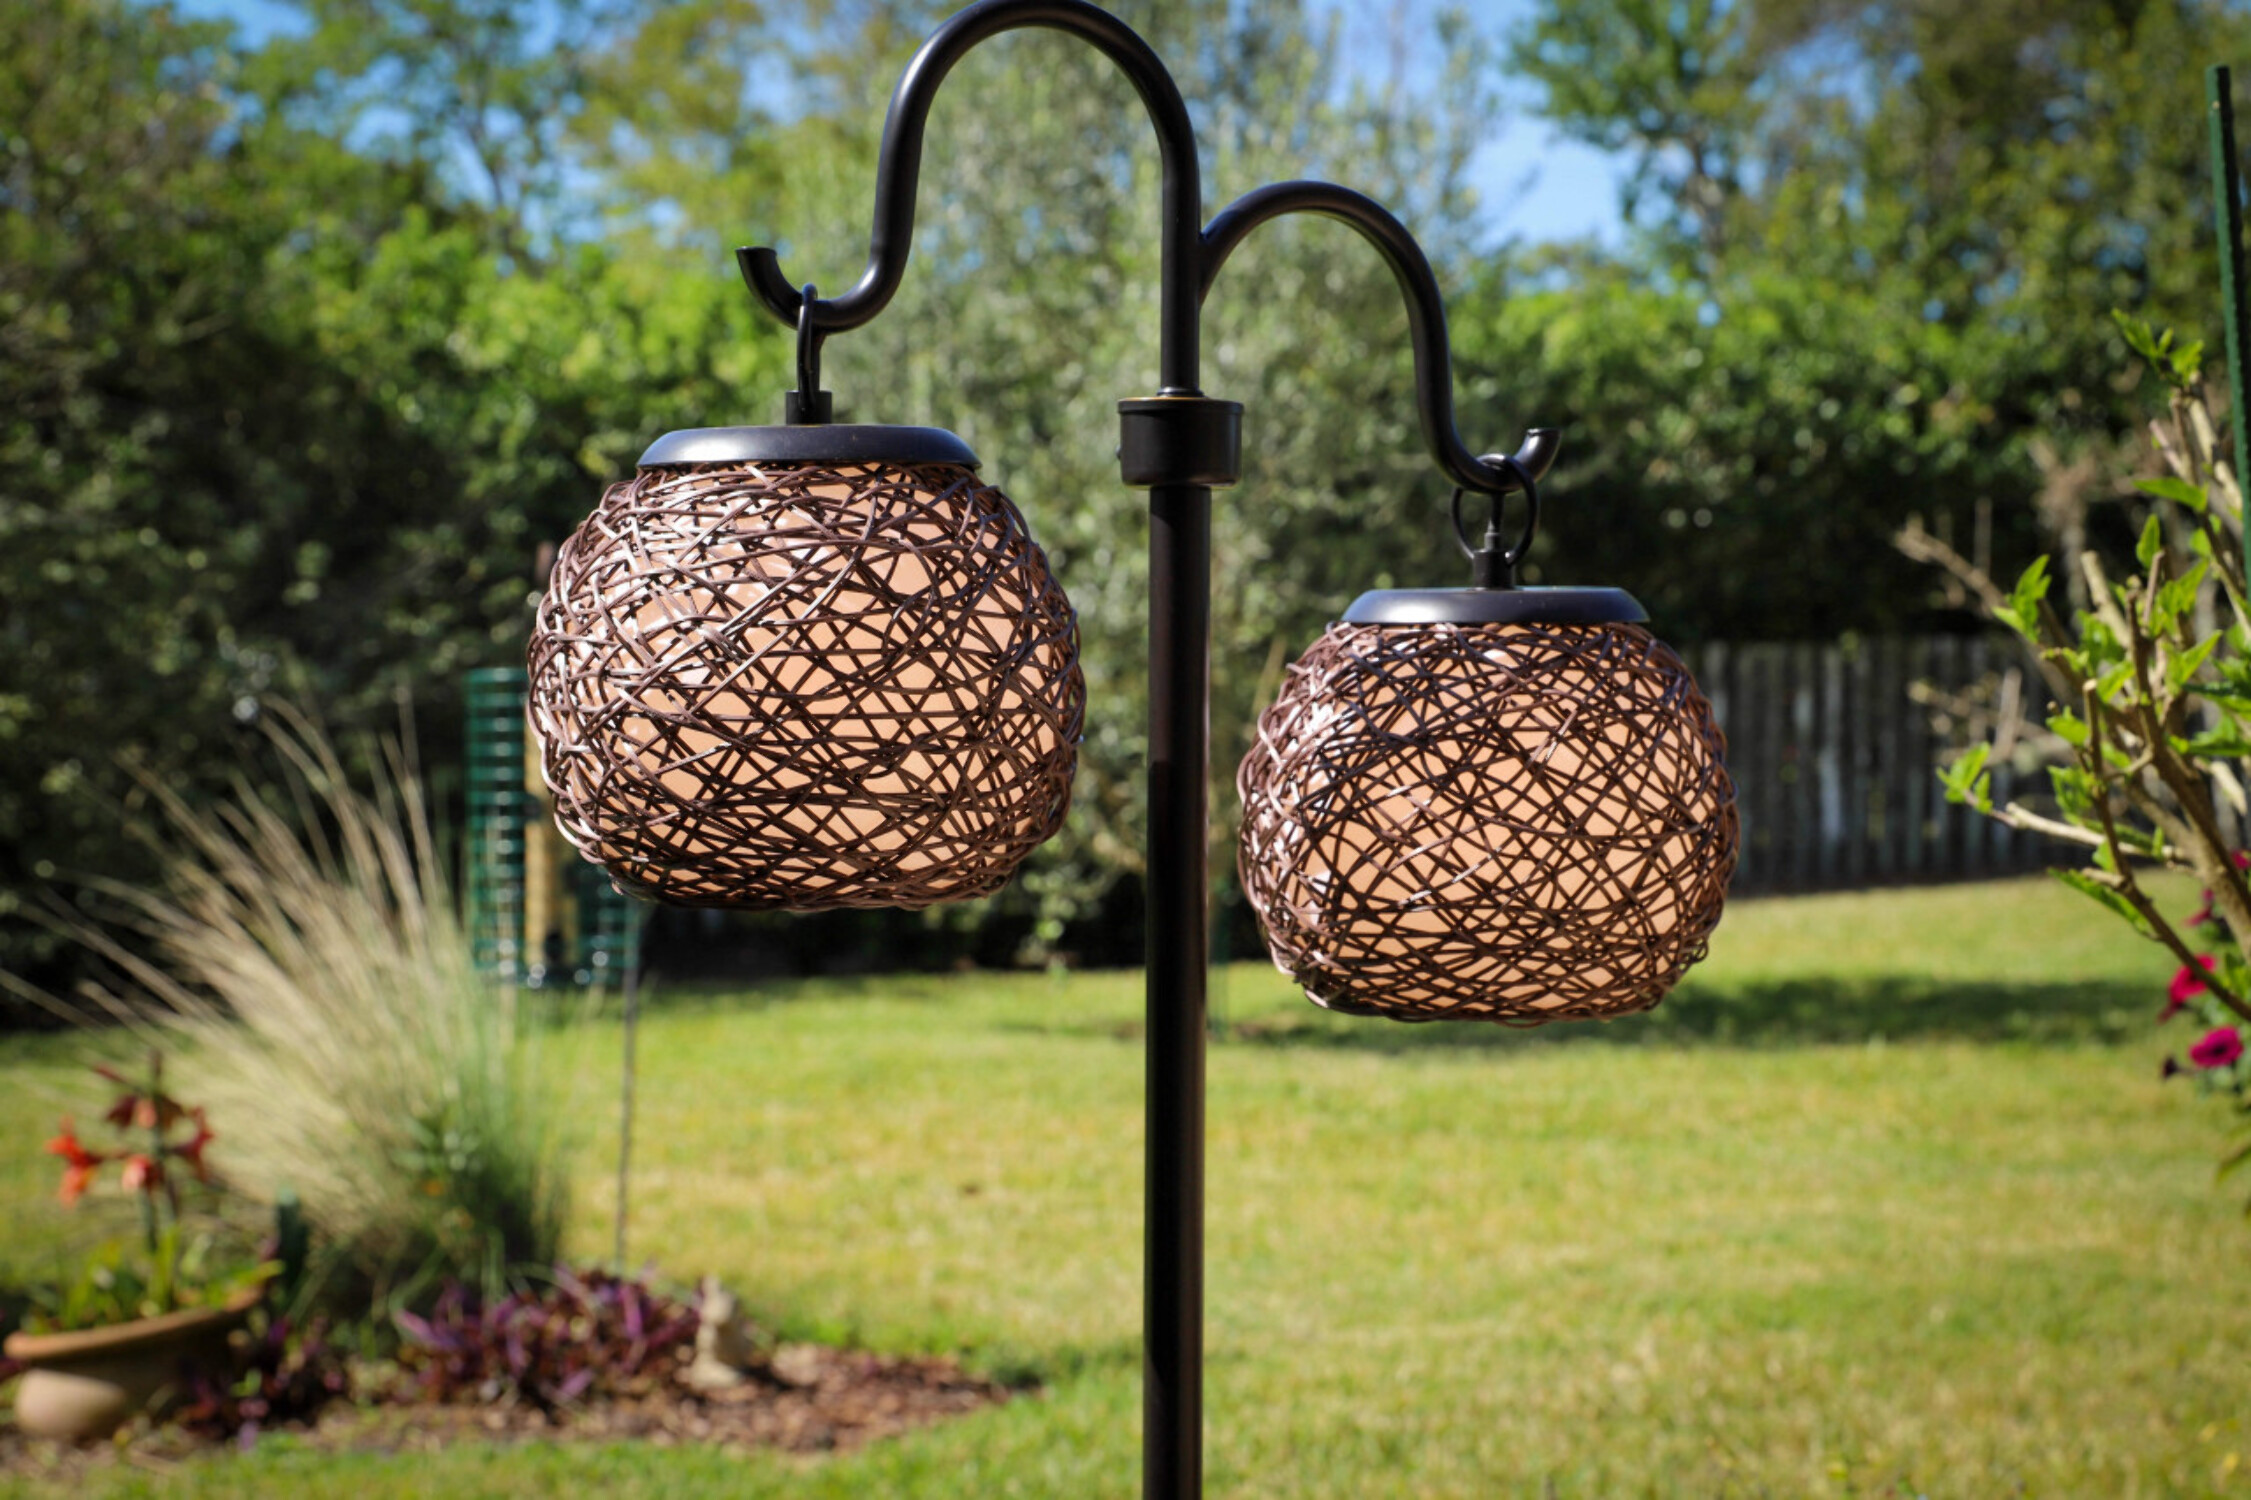 Kenroy Home Mediterranean-Inspired Outdoor Table Lamp, 29 Inch Height, Oil Rubbed Bronze Finish, Cream Acrylic Inner Shade with Rattan Entwined Outer Shades, 4 Way Adjustable Lighting, Pole Switch - image 1 of 8